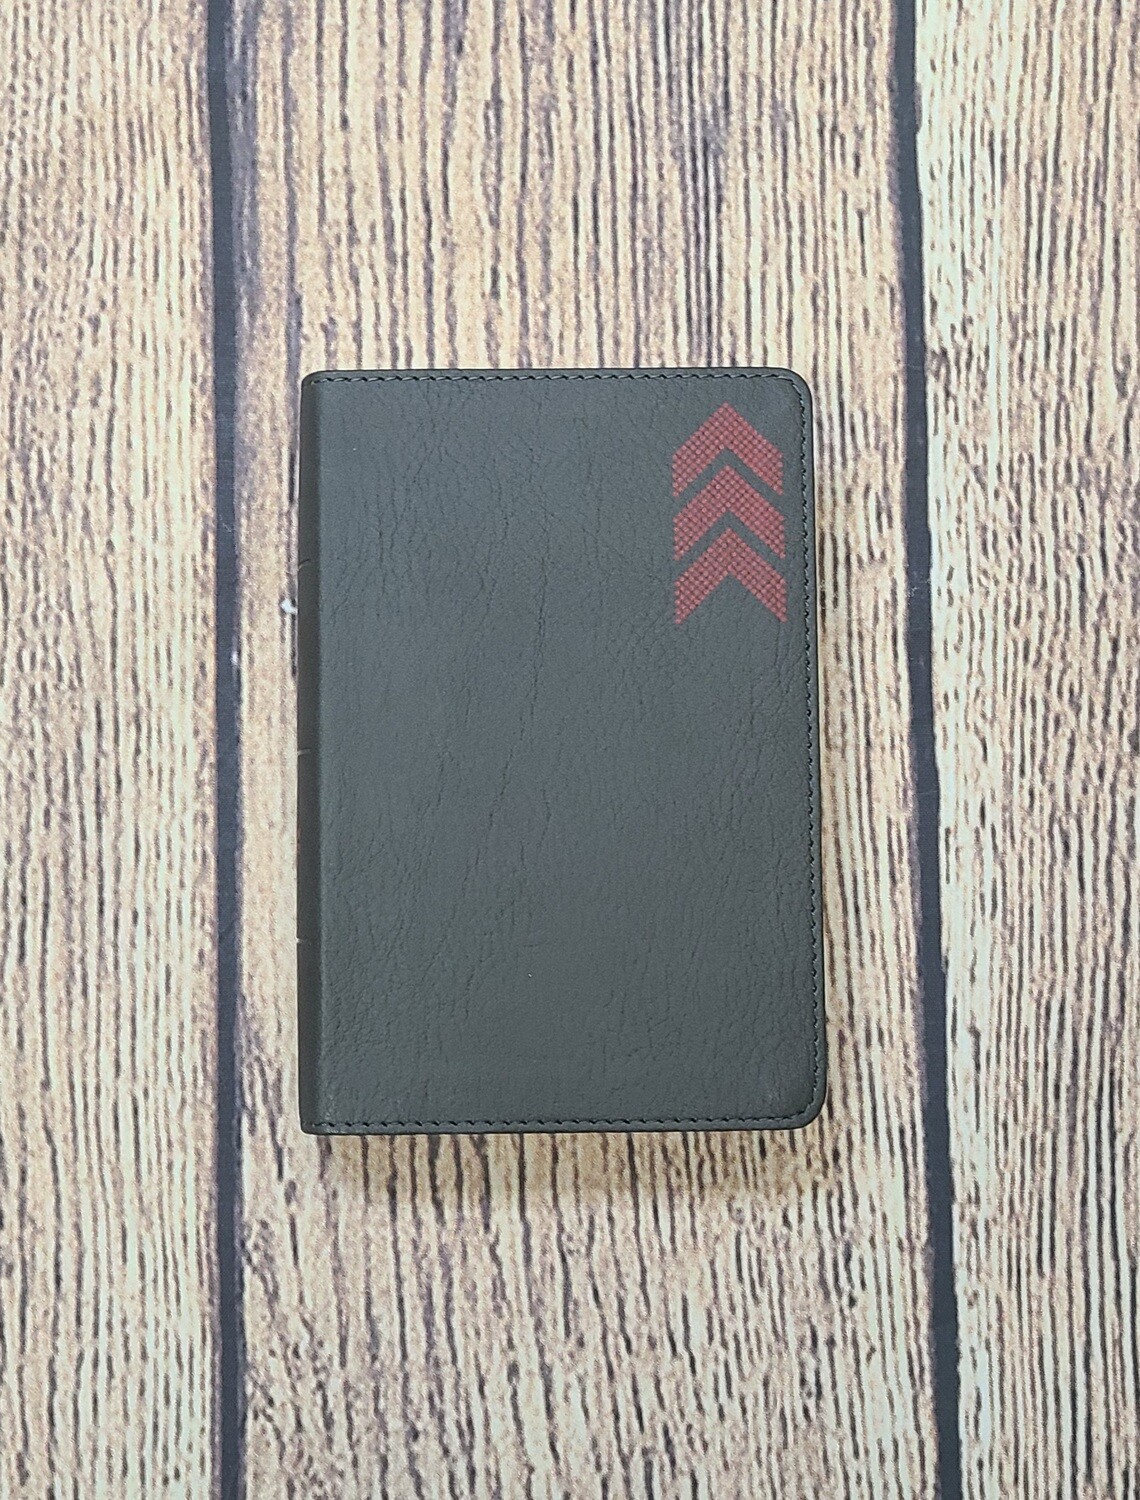 CSB On-The-Go Bible - Charcoal Arrow LeatherTouch